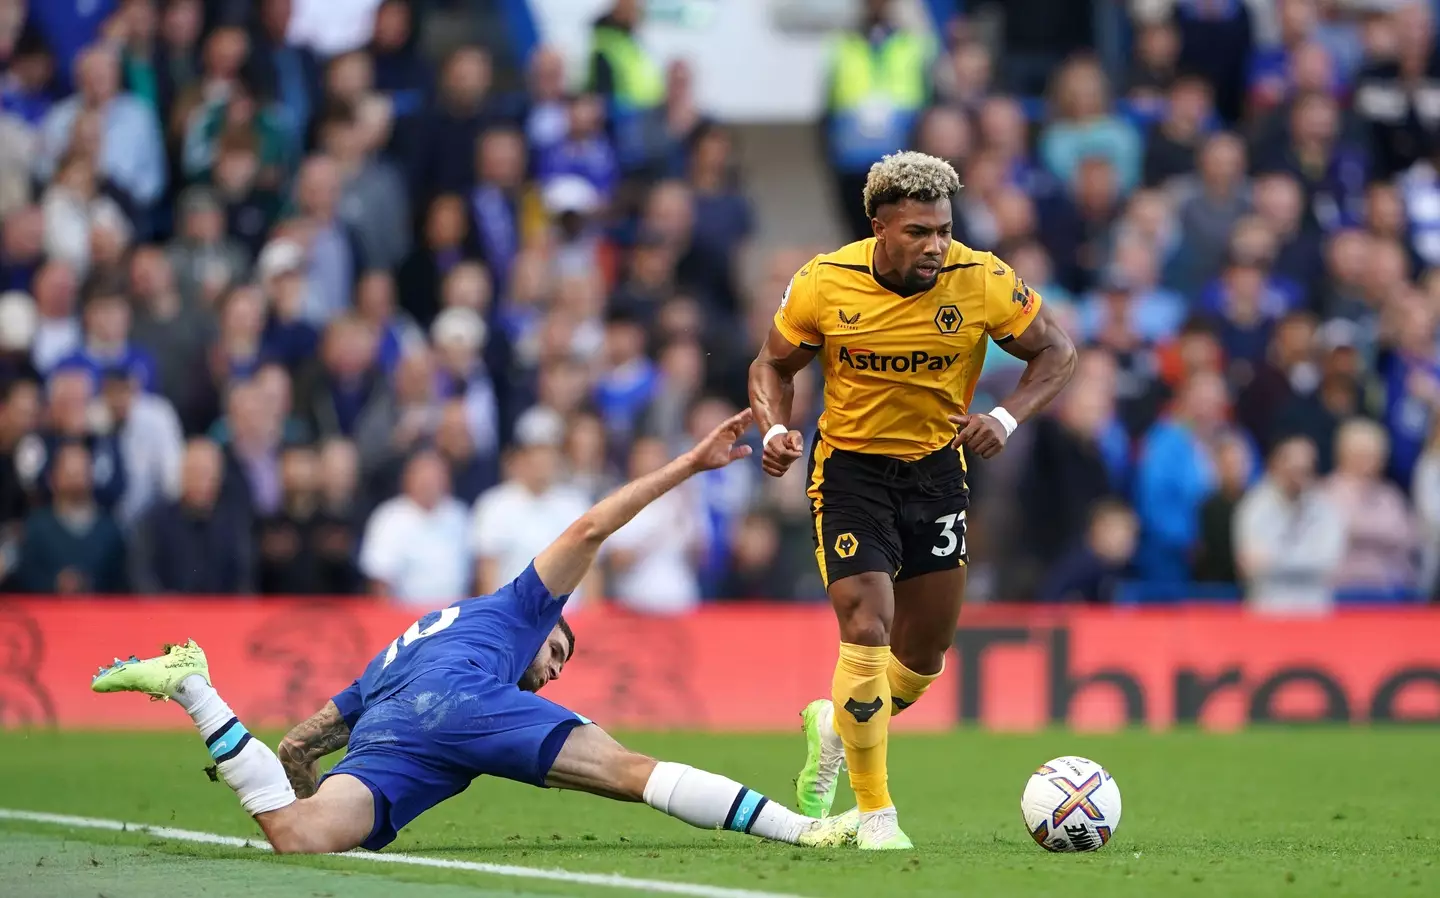 Wolverhampton Wanderers' Adama Traore (right) and Chelsea's Christian Pulisic battle for the ball during the Premier League match at Stamford Bridge. (Alamy)